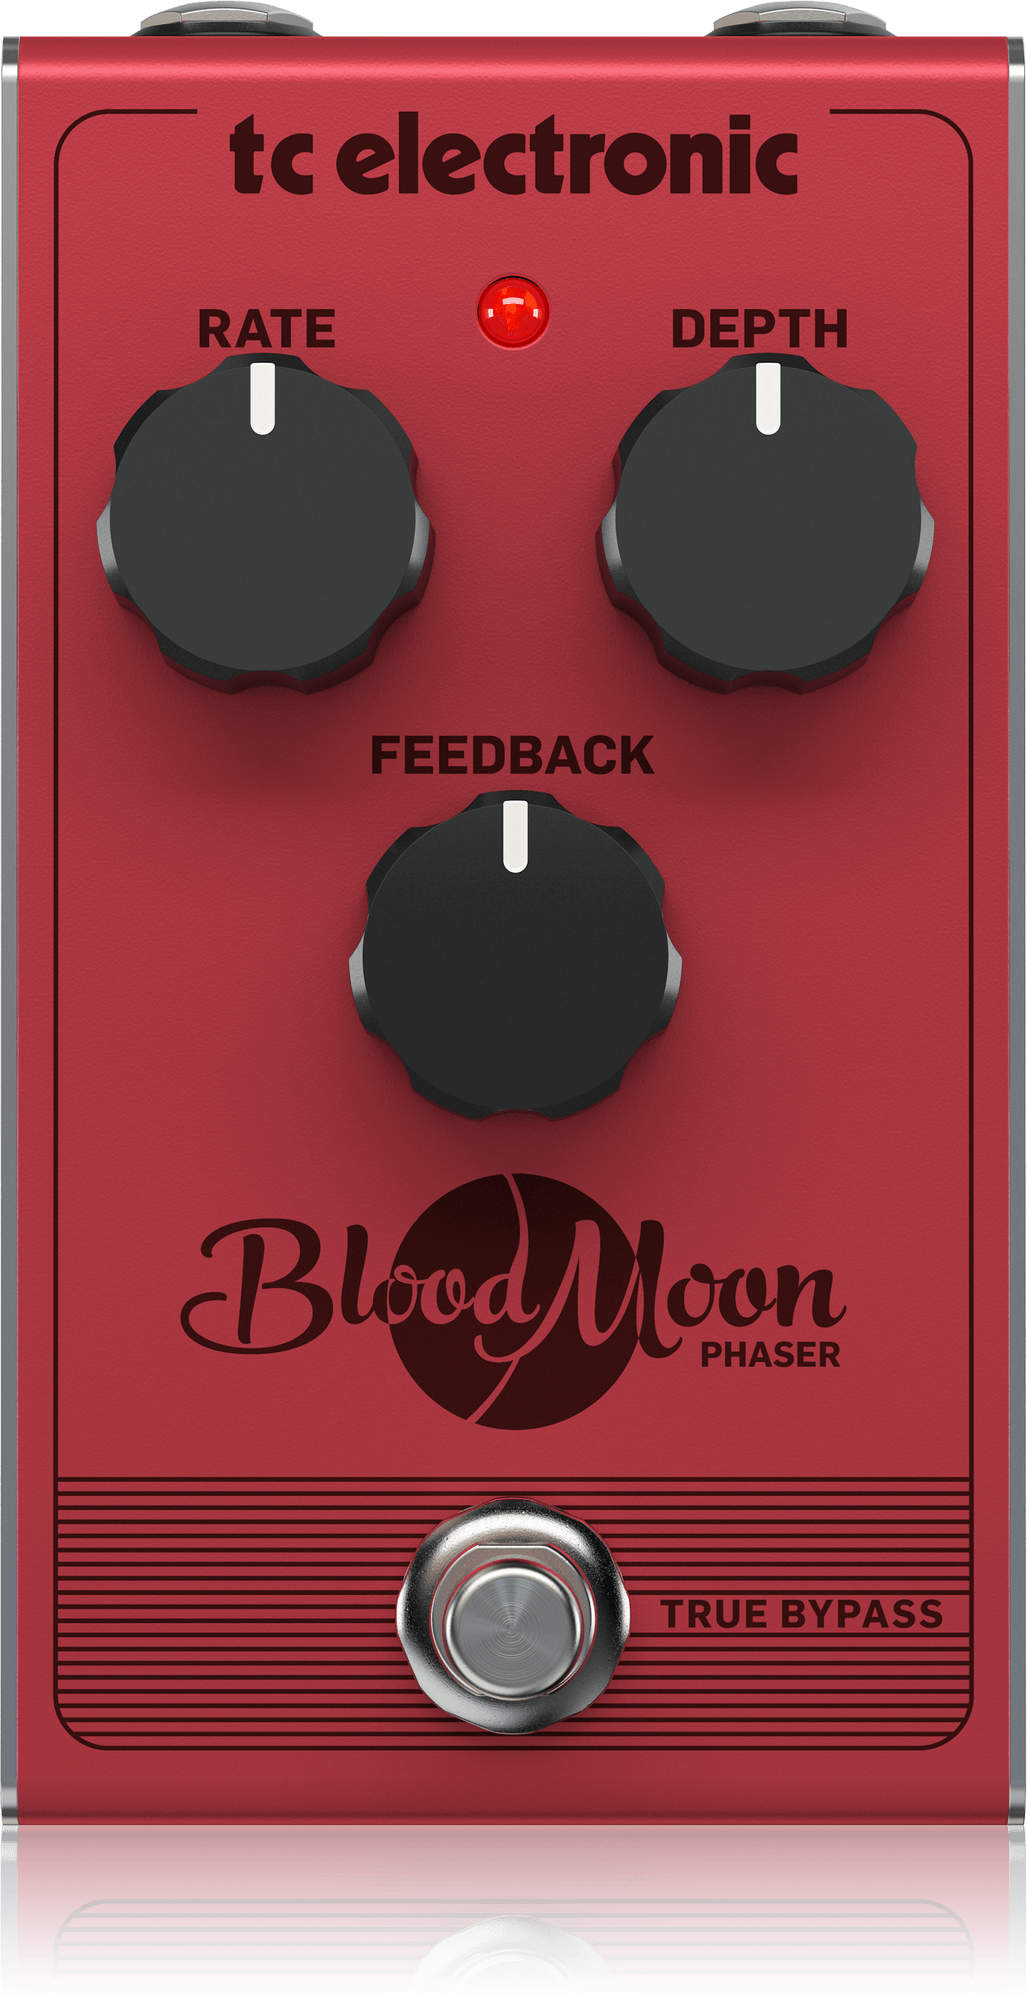 https://mediadl.musictribe.com/media/PLM/data/images/products/P0CAR/2000Wx2000H/Image_TE_P0CAR_BLOOD-MOON-PHASER_Top_XL.png